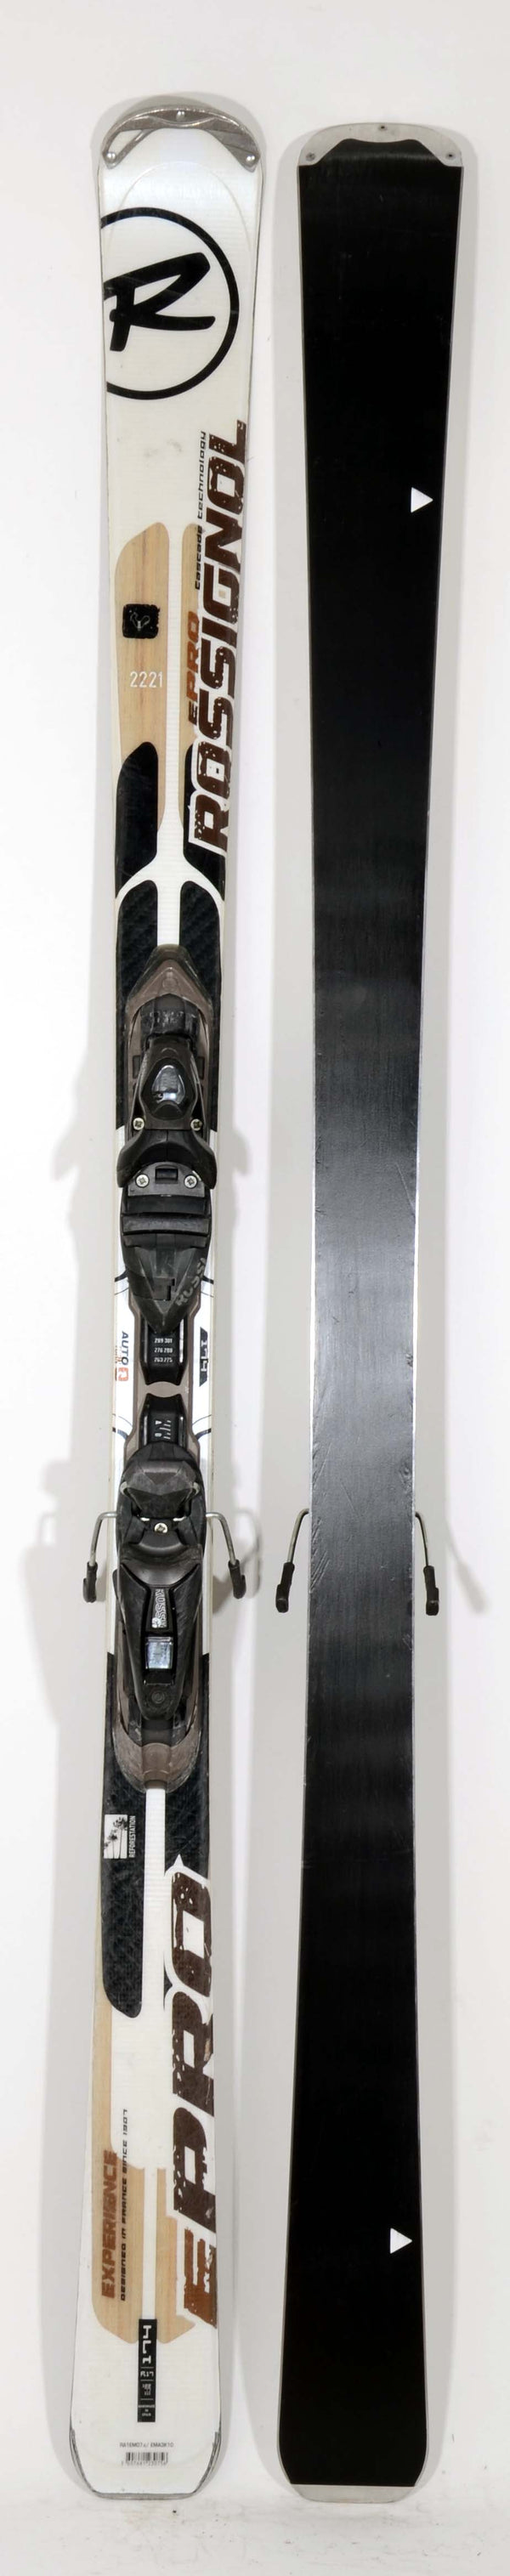 Rossignol EXPERIENCE PRO - Skis d'occasion